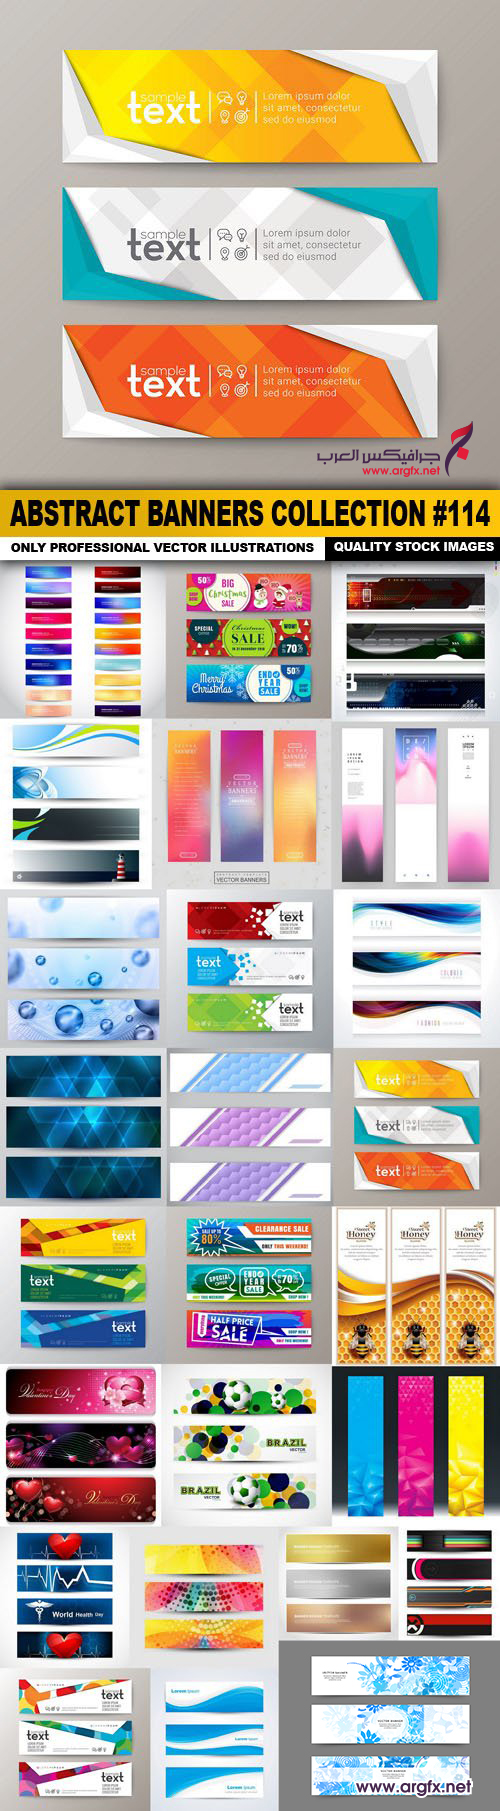  Abstract Banners Collection #114 - 25 Vectors